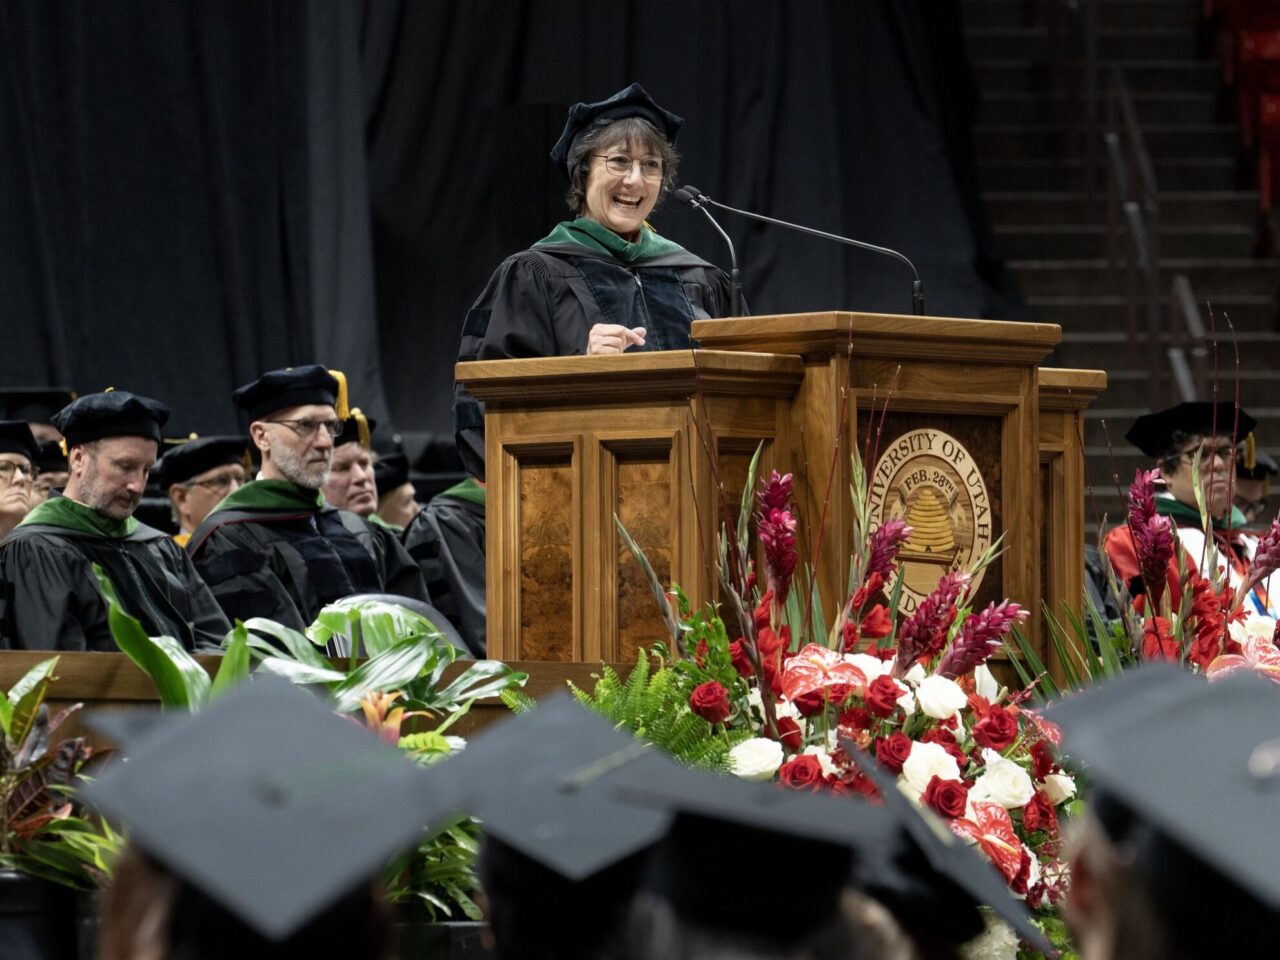 Monica Bertagnolli: The honor of giving two commencement addresses